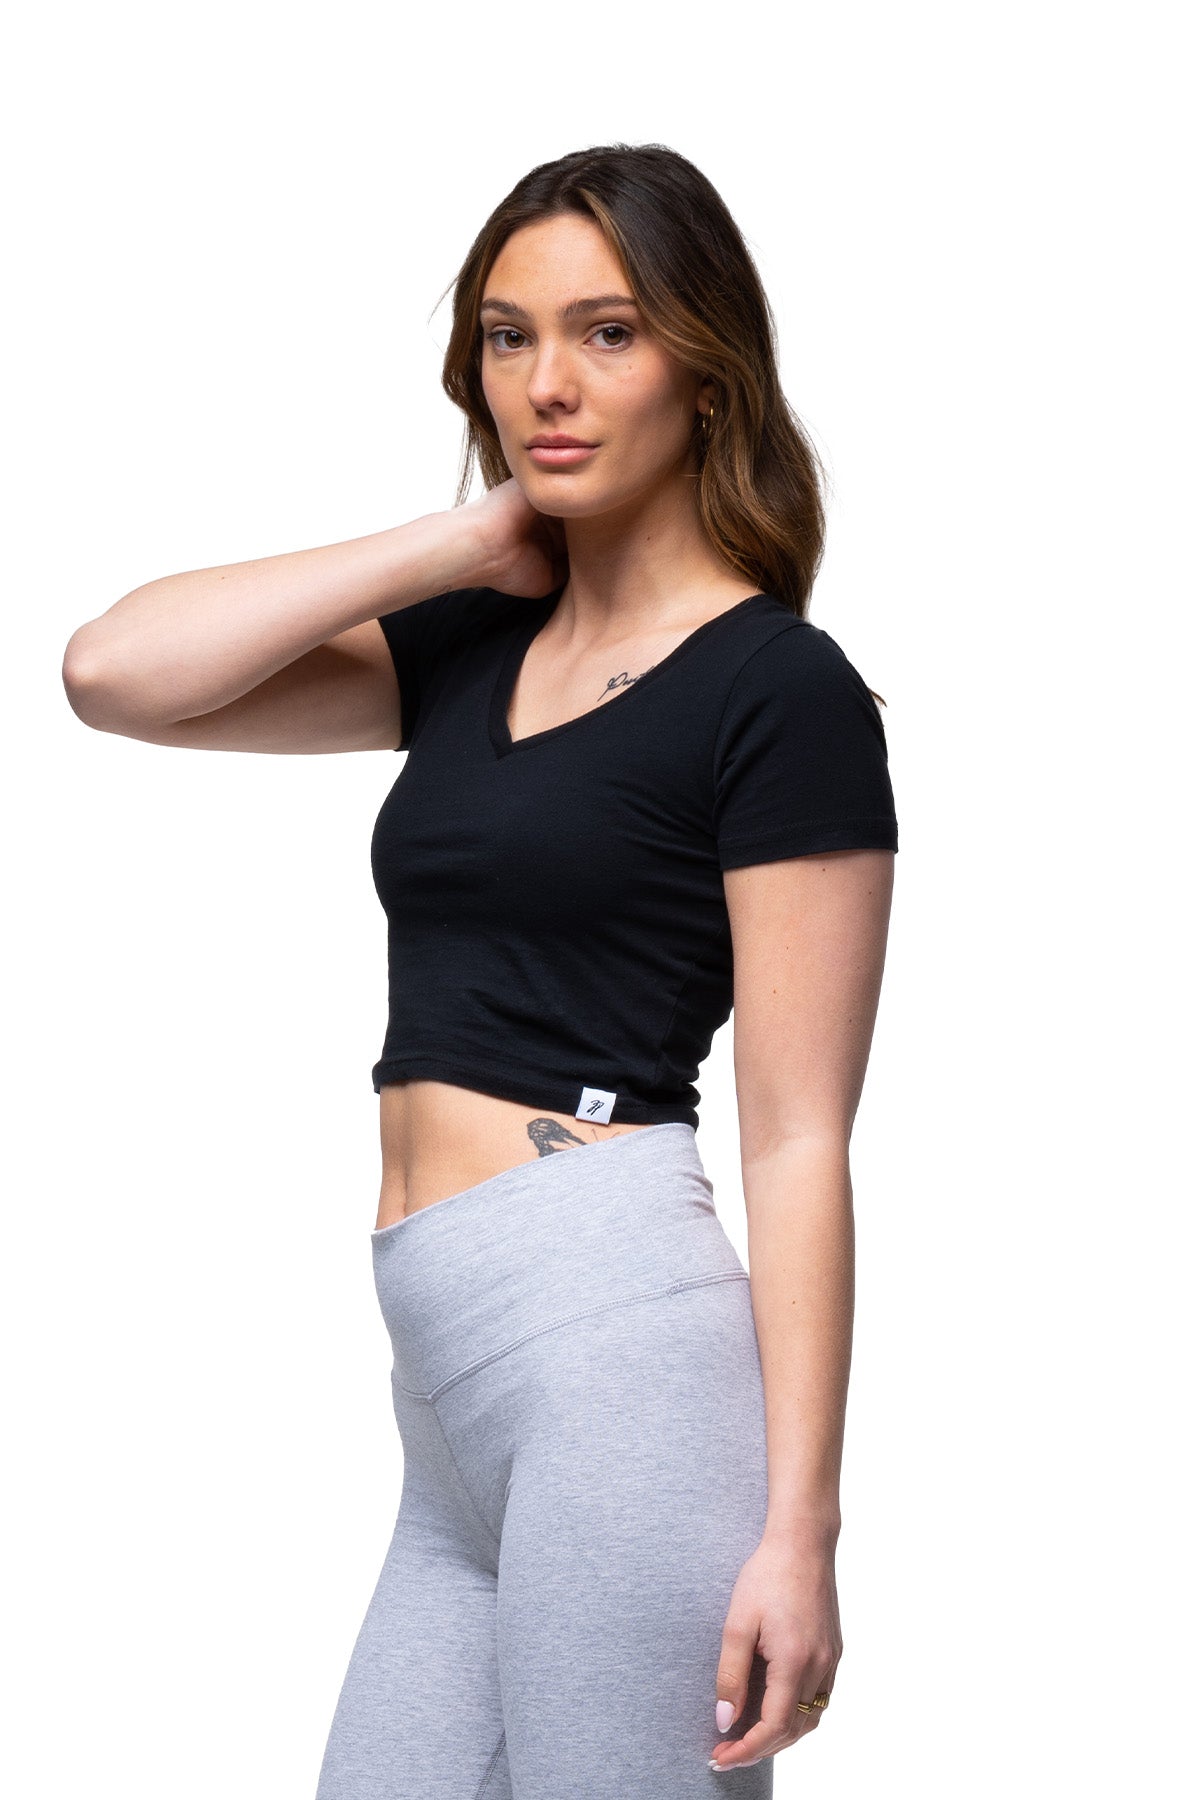 Kyra - Flared Jeans with Crossover Waistband